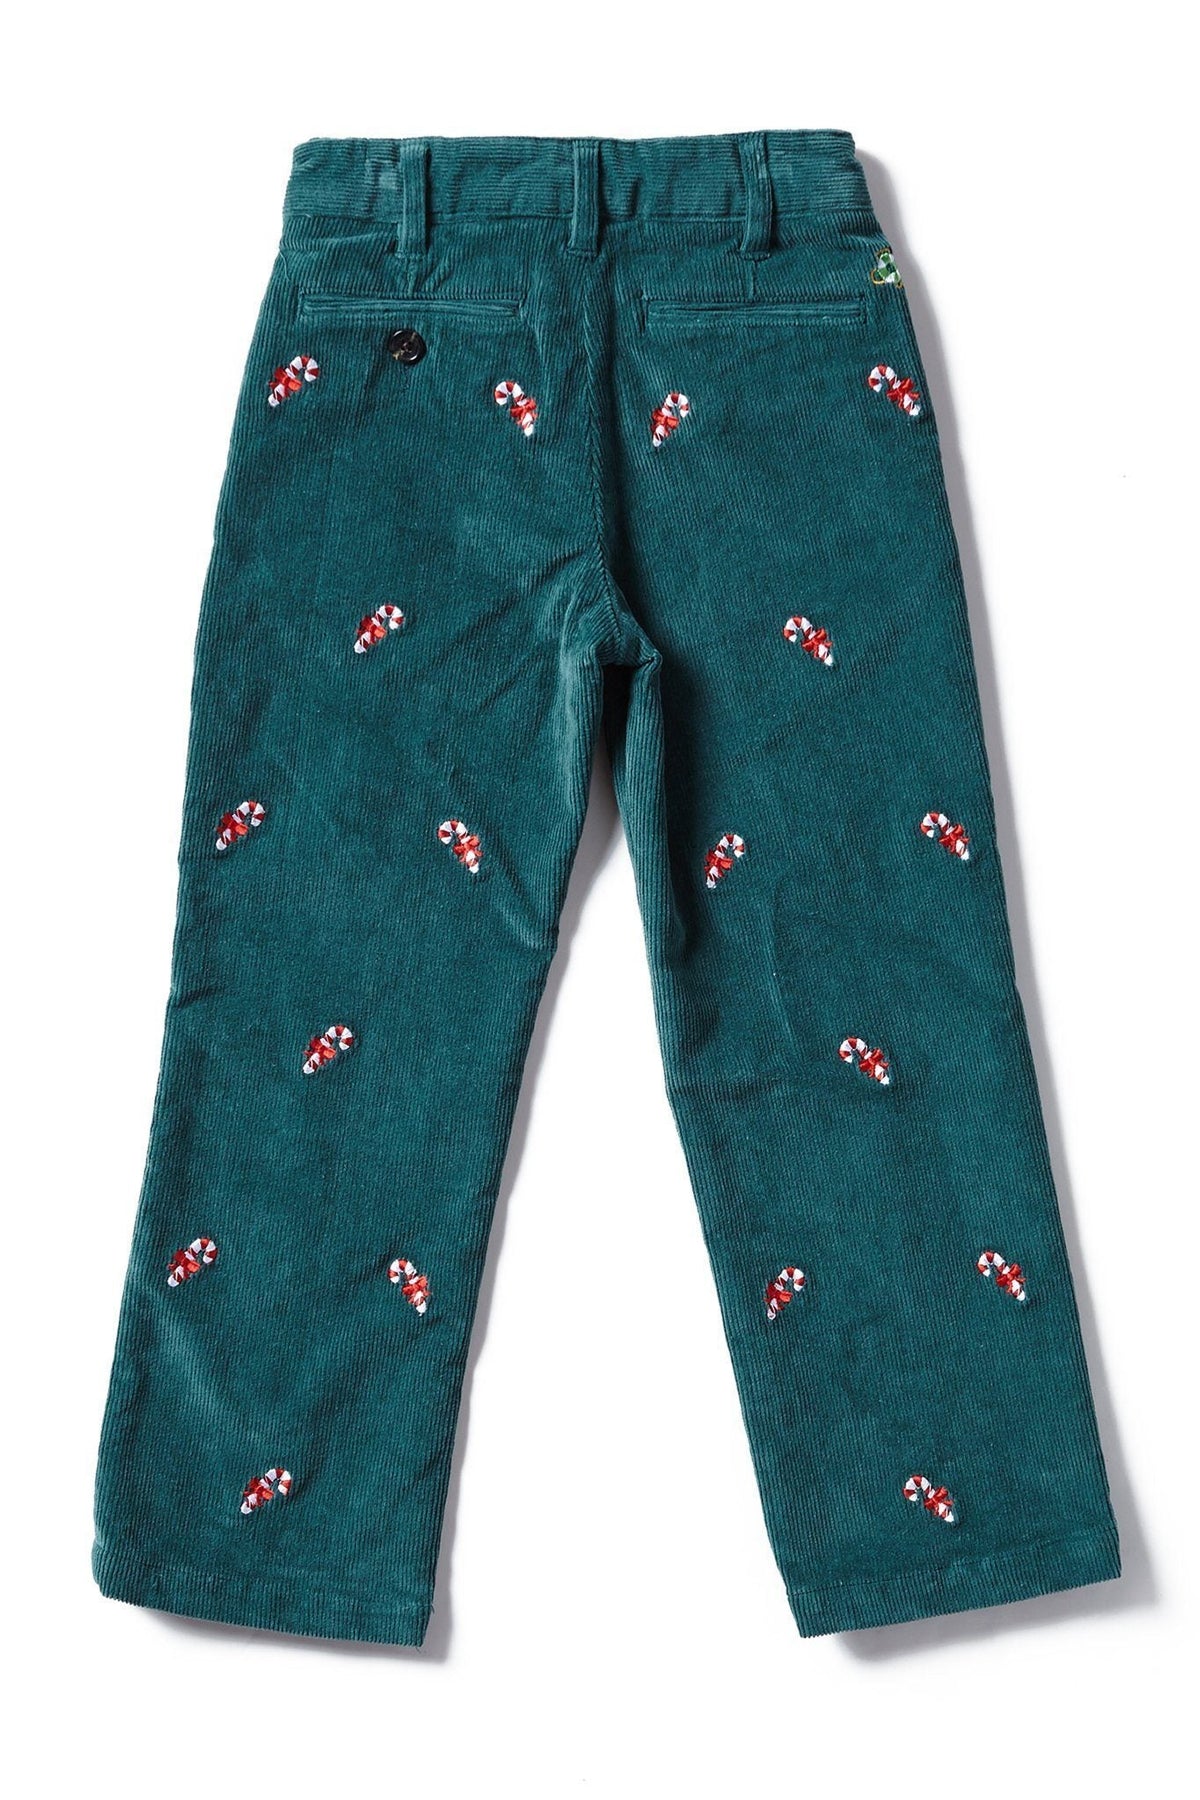 Boys Holiday Corduroy Pant Hunter Green Embroidered With Candy Cane ...